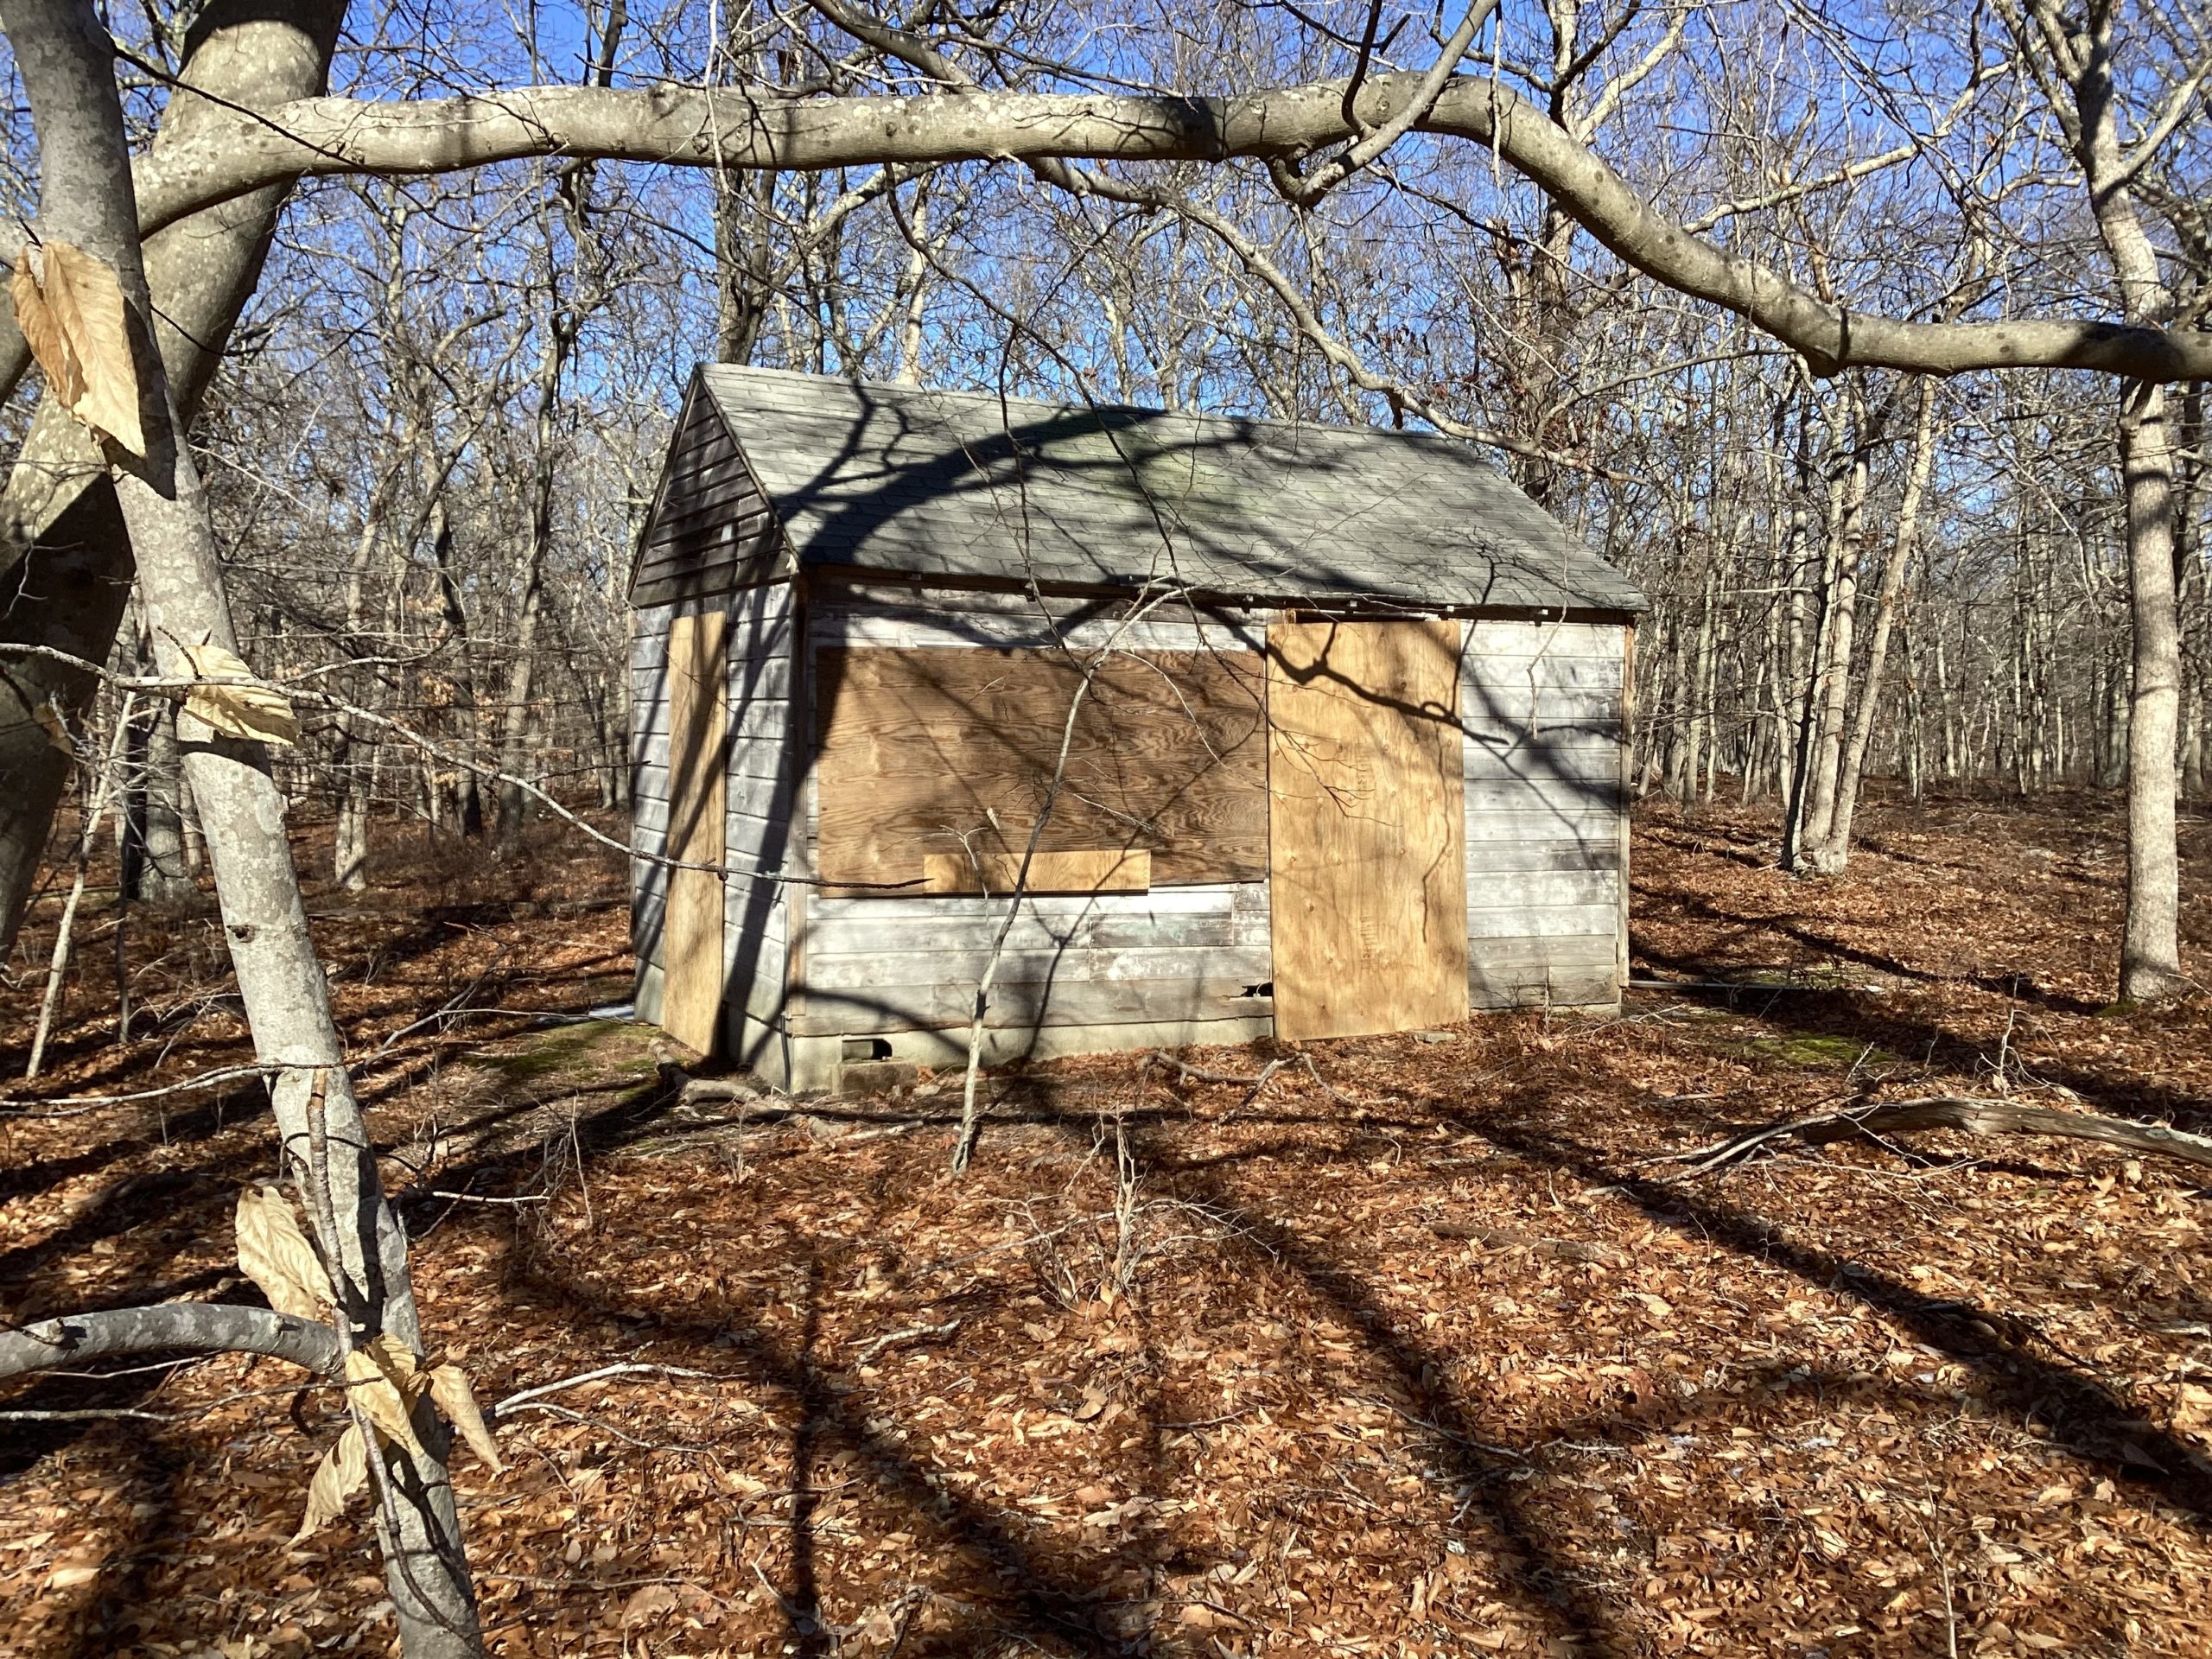 The guest cottage on the Springs property where artists James Brooks and Charlotte Parks once lived, as it stands today. BRYAN BOYHAN